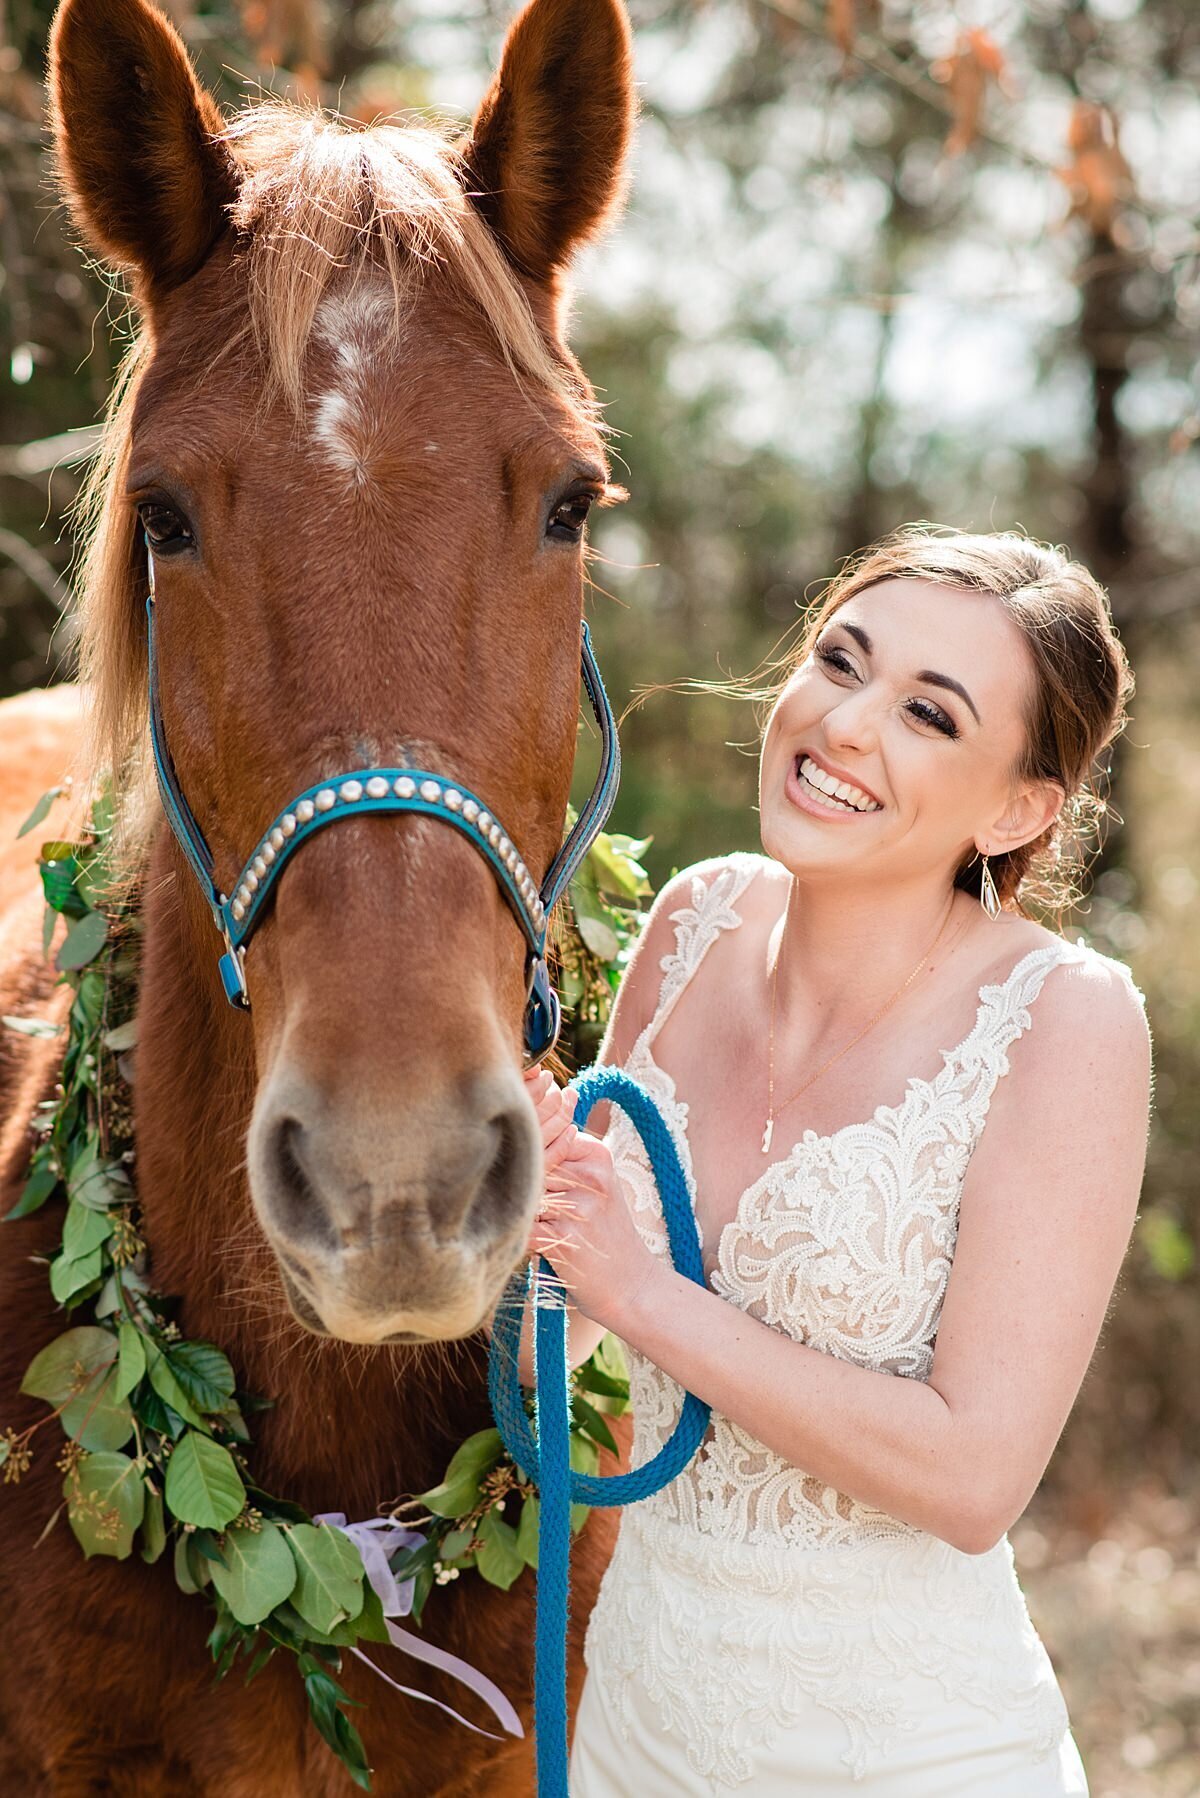 A bride wearing a lace wedding dress with a plunging neckline smiles up at her brown thoroughbred horse who is wearing a teal harness and a wreath of greenery at Grace Valley Farm.